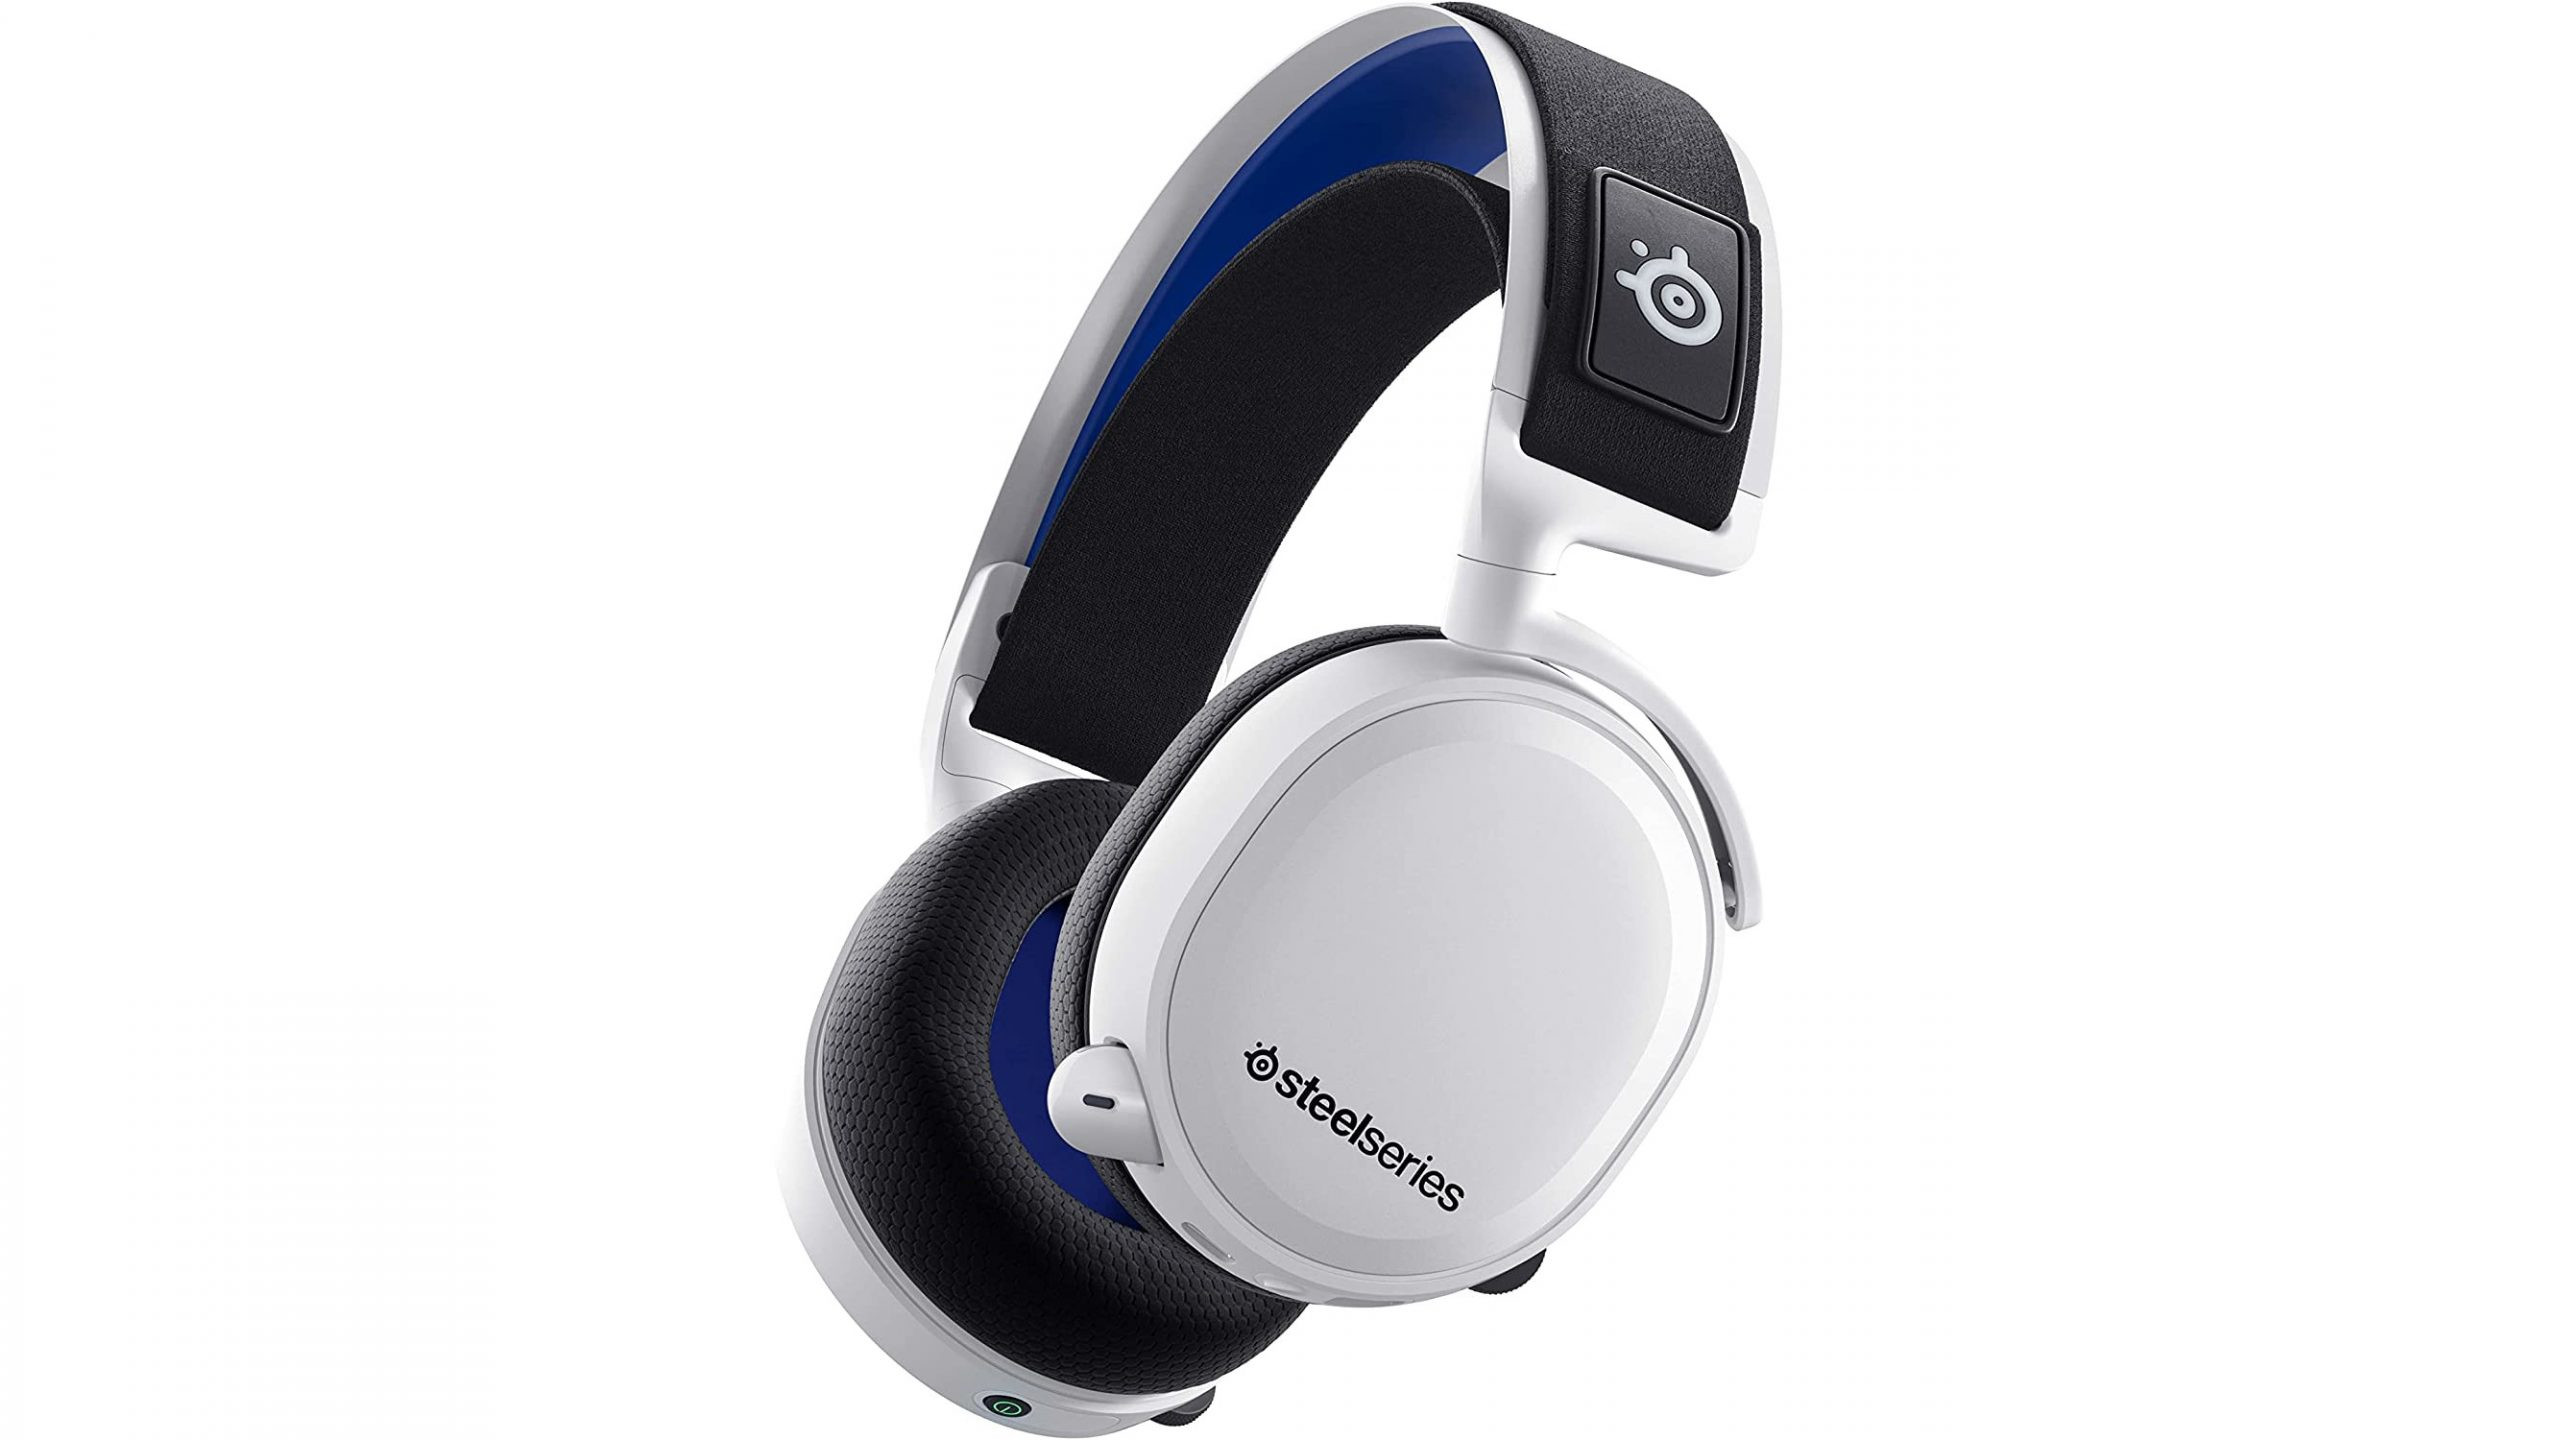 The SteelSeries Arctis 7P+ Wireless headset on a white background